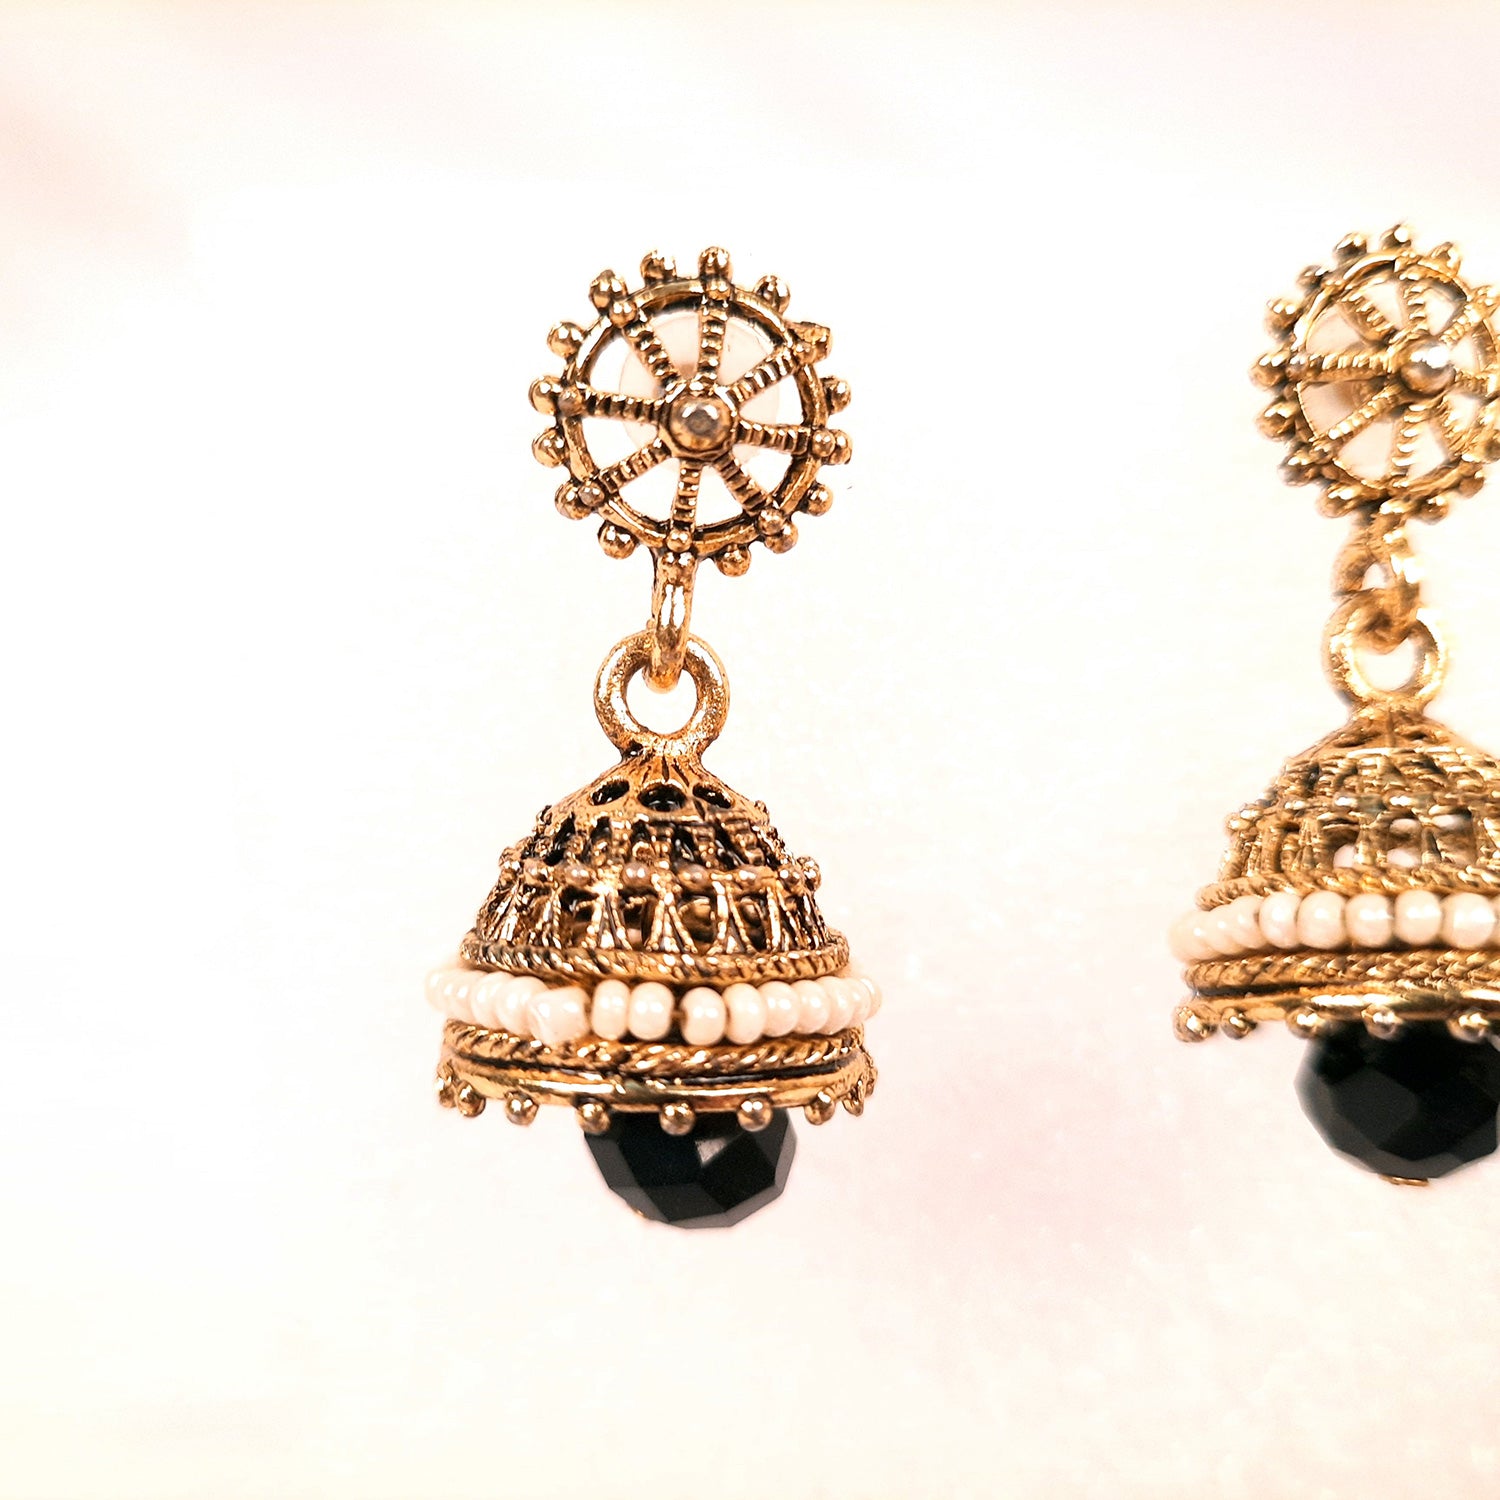 Earrings Jhumka - for Girls and Women | Latest Stylish Fashion Jewellery | Gifts for Her, Friendship Day, Valentine's Day Gift - apkamart